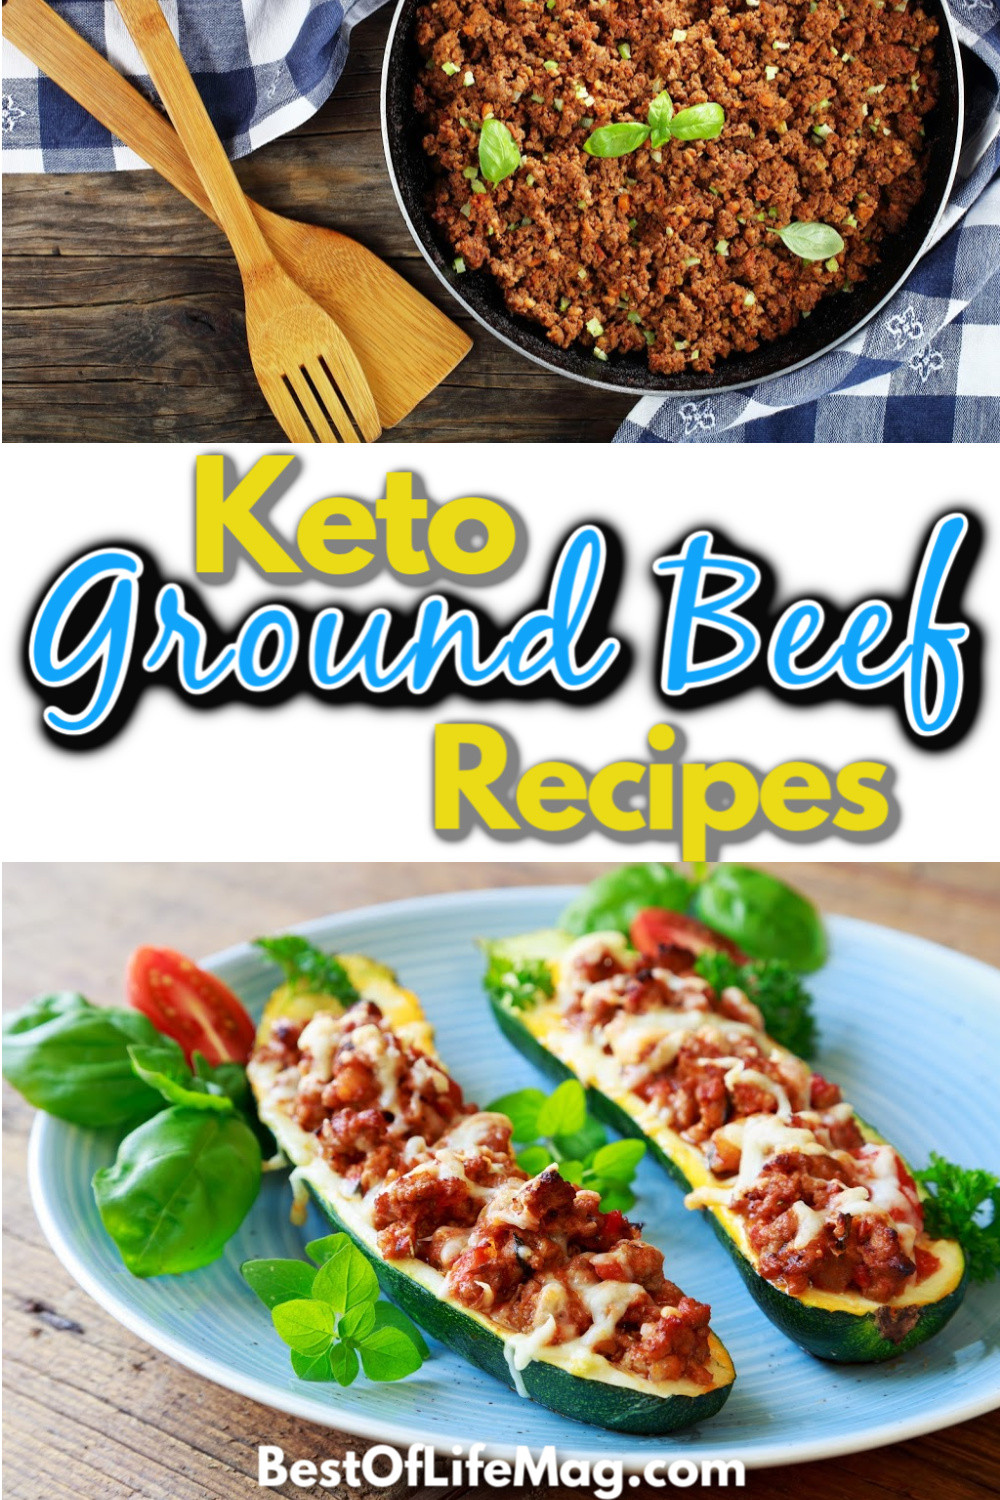 Keto Diet Recipes Beef
 Easy Keto Recipes with Ground Beef The Best of Life Magazine